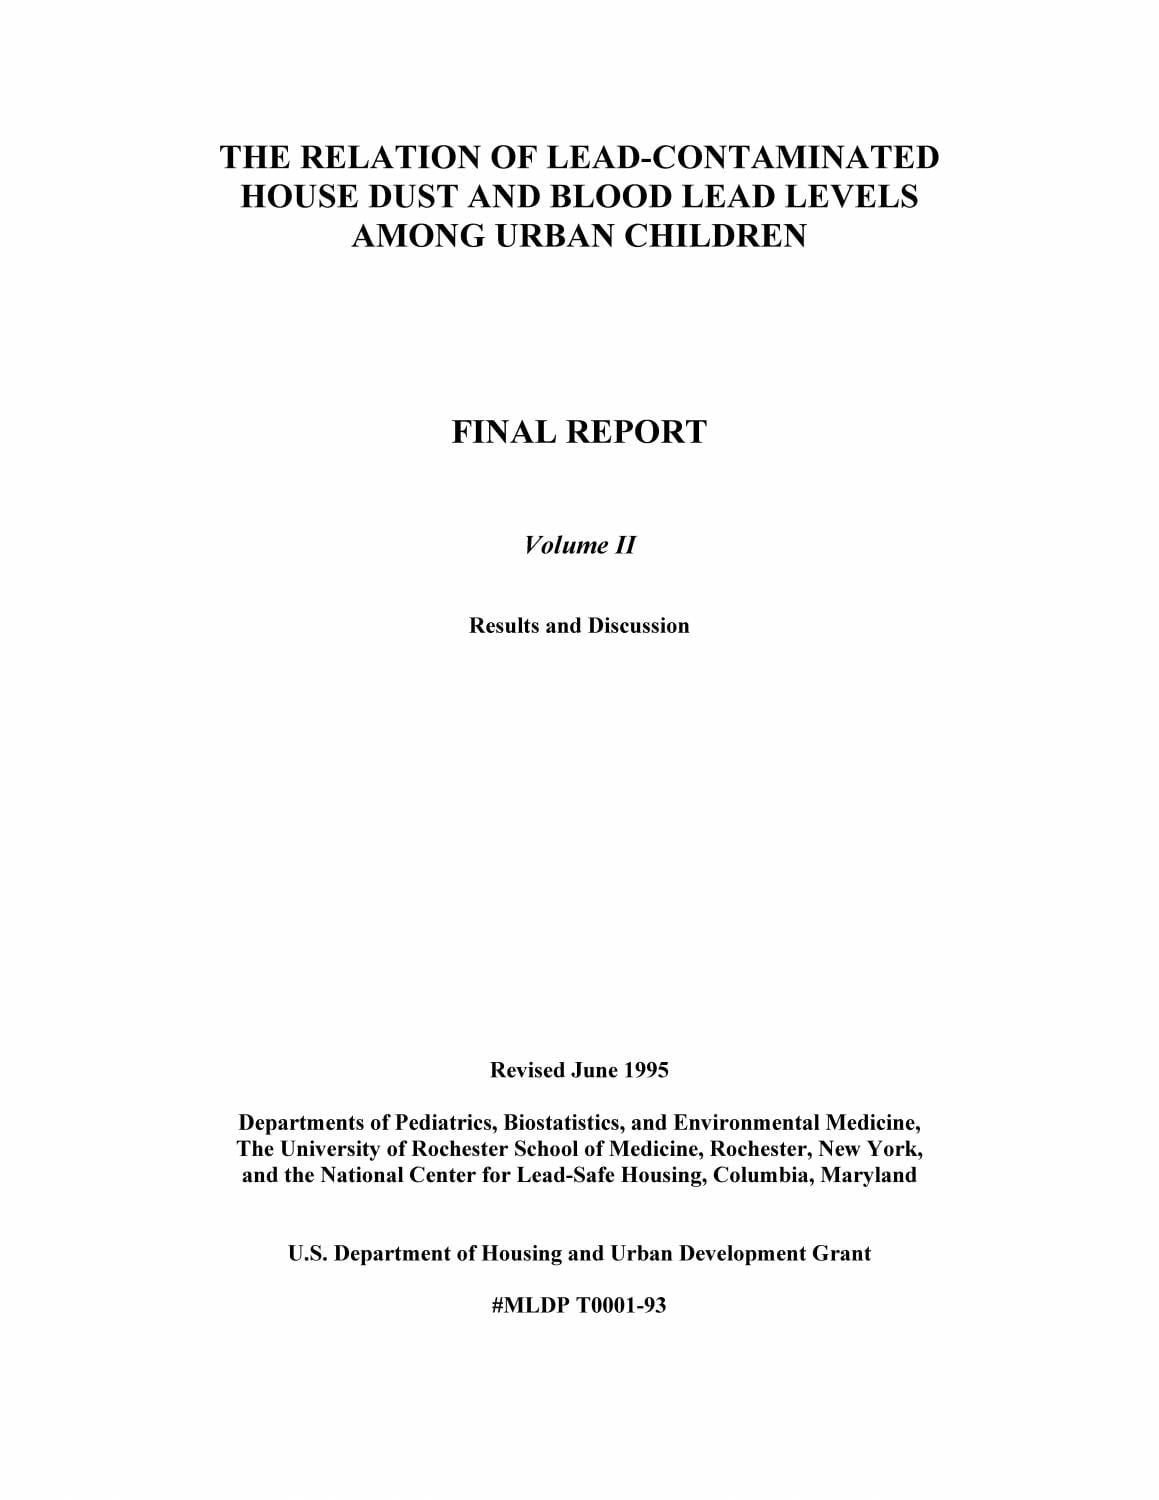 The Relation of Lead-Contaminated House Dust and Blood Lead Levels among Urban Children: Final Report Volume II: Results and Discussion